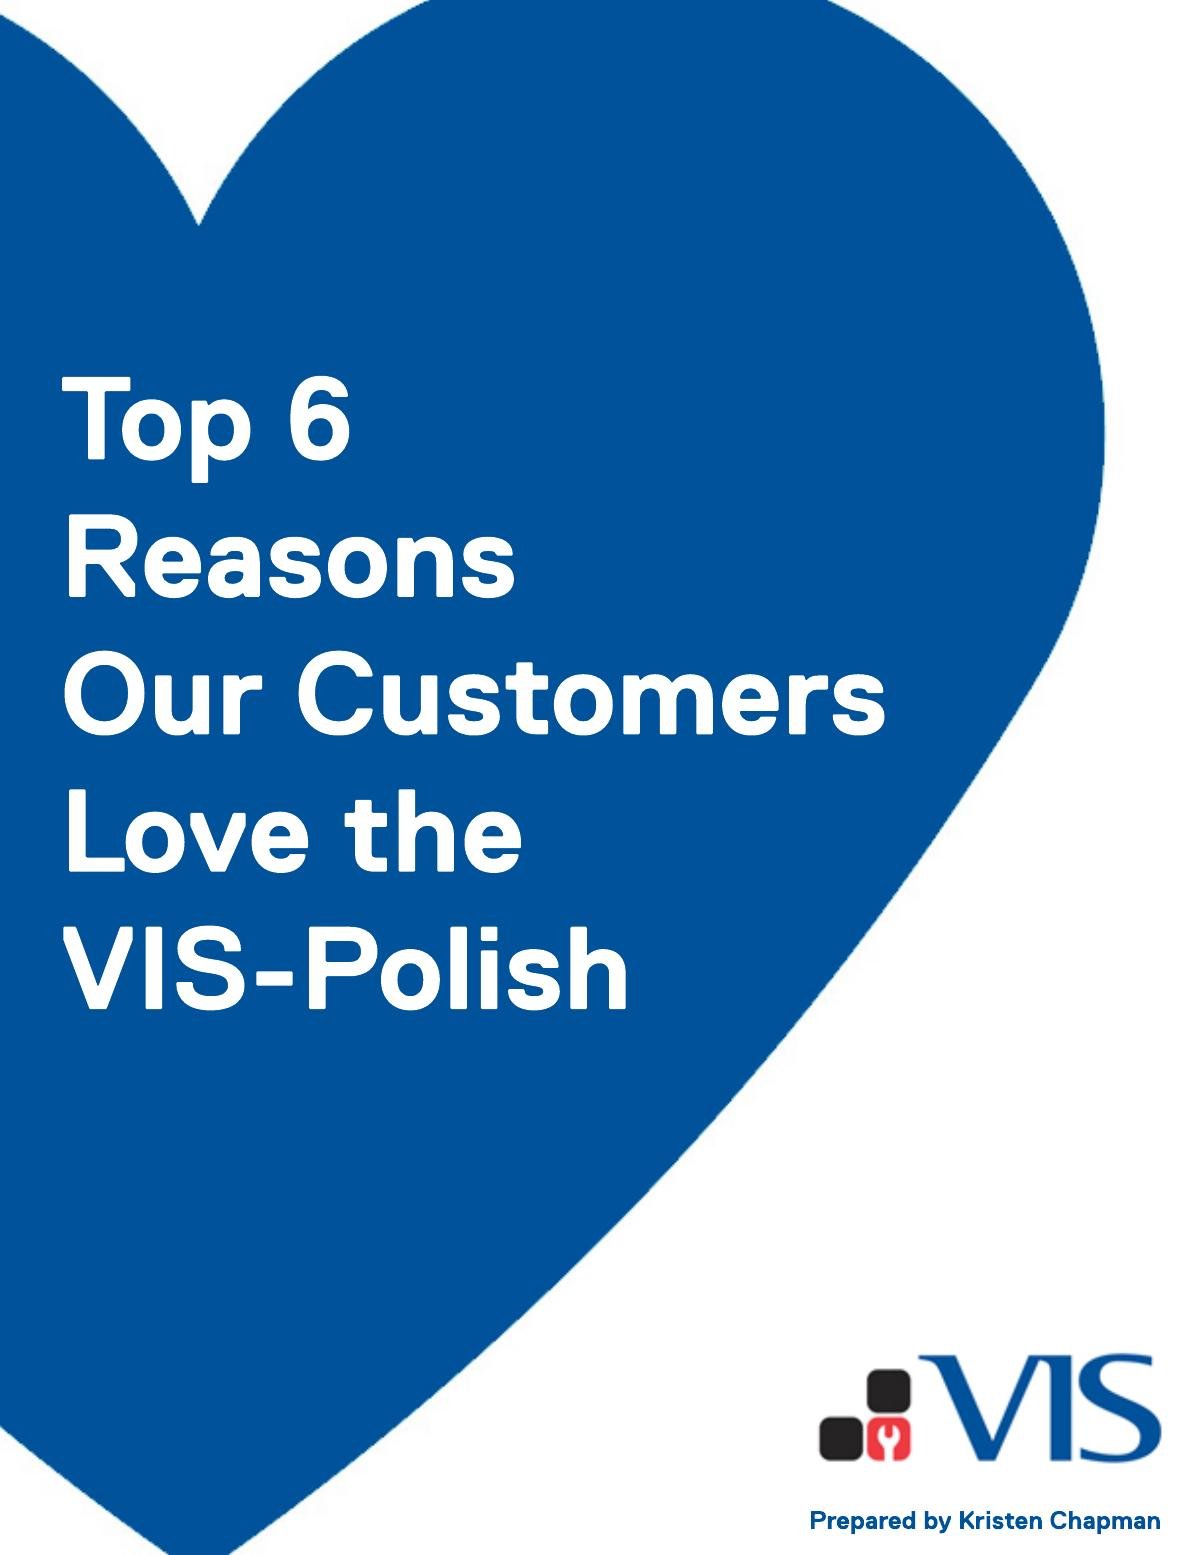 Top 6 Reasons Our Customers Love the VIS-Polish